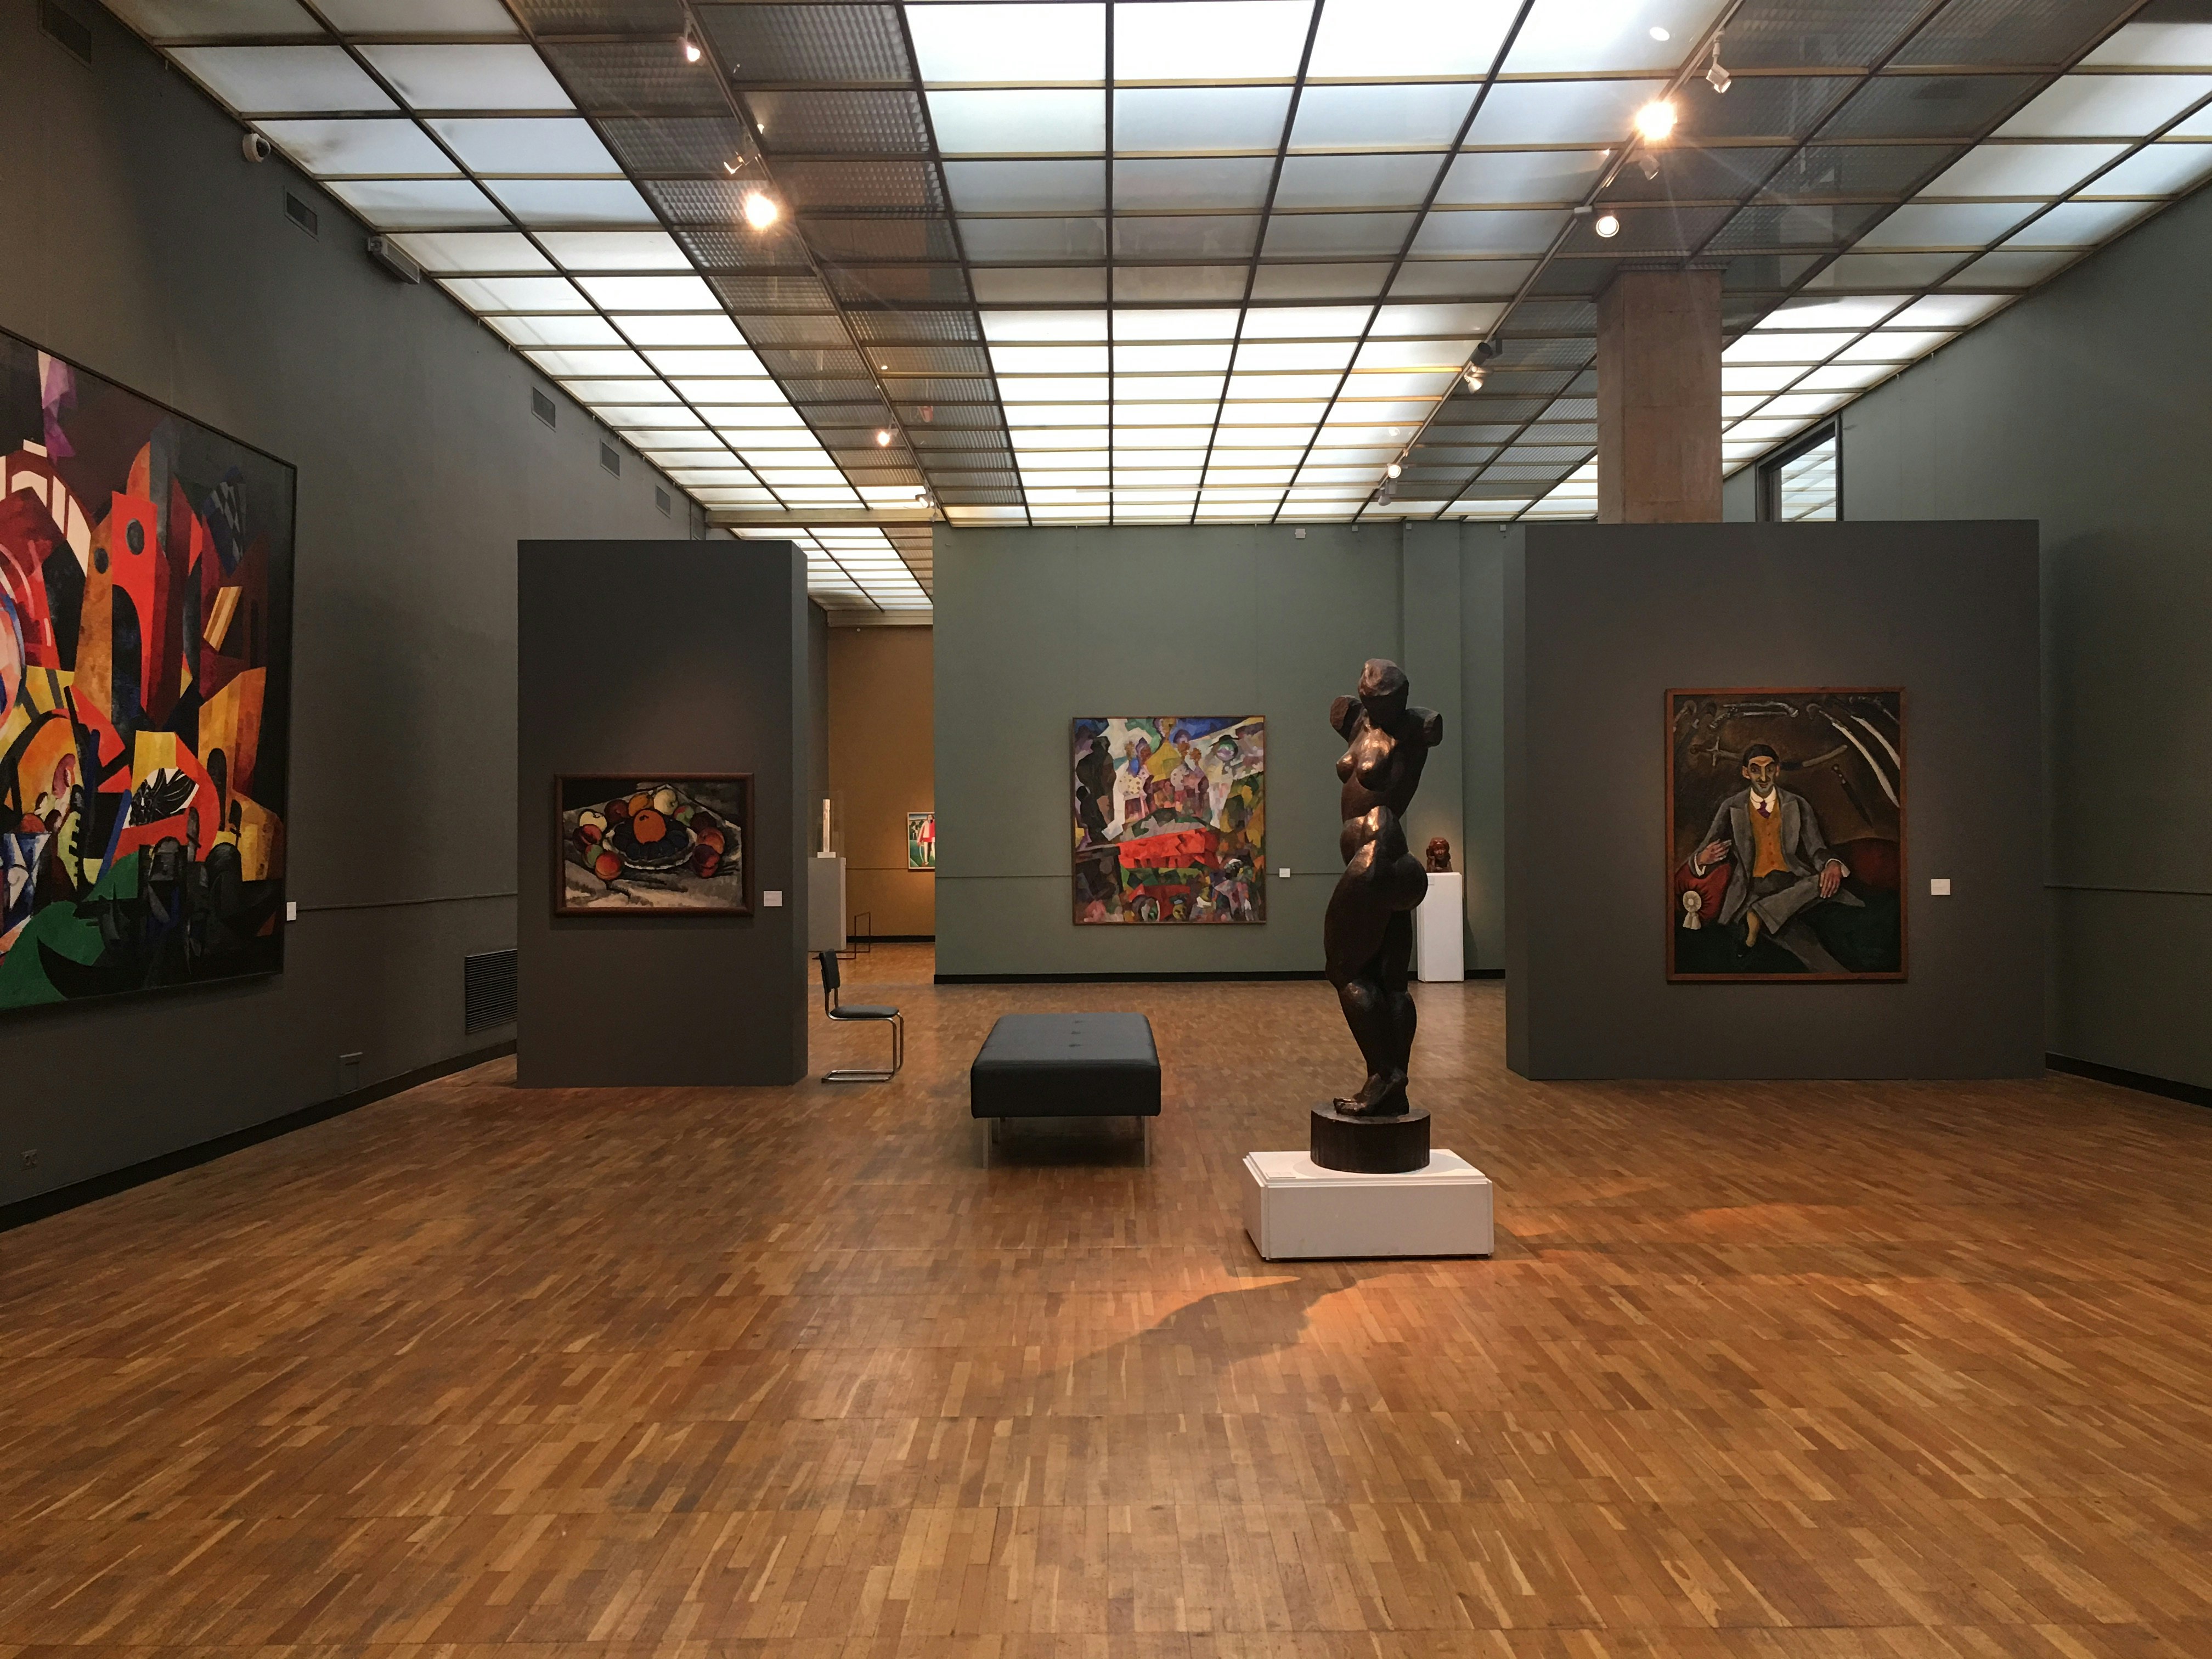 A bronze sculpture inside a gallery space, surrounded by geometrically striking Russian paintings.